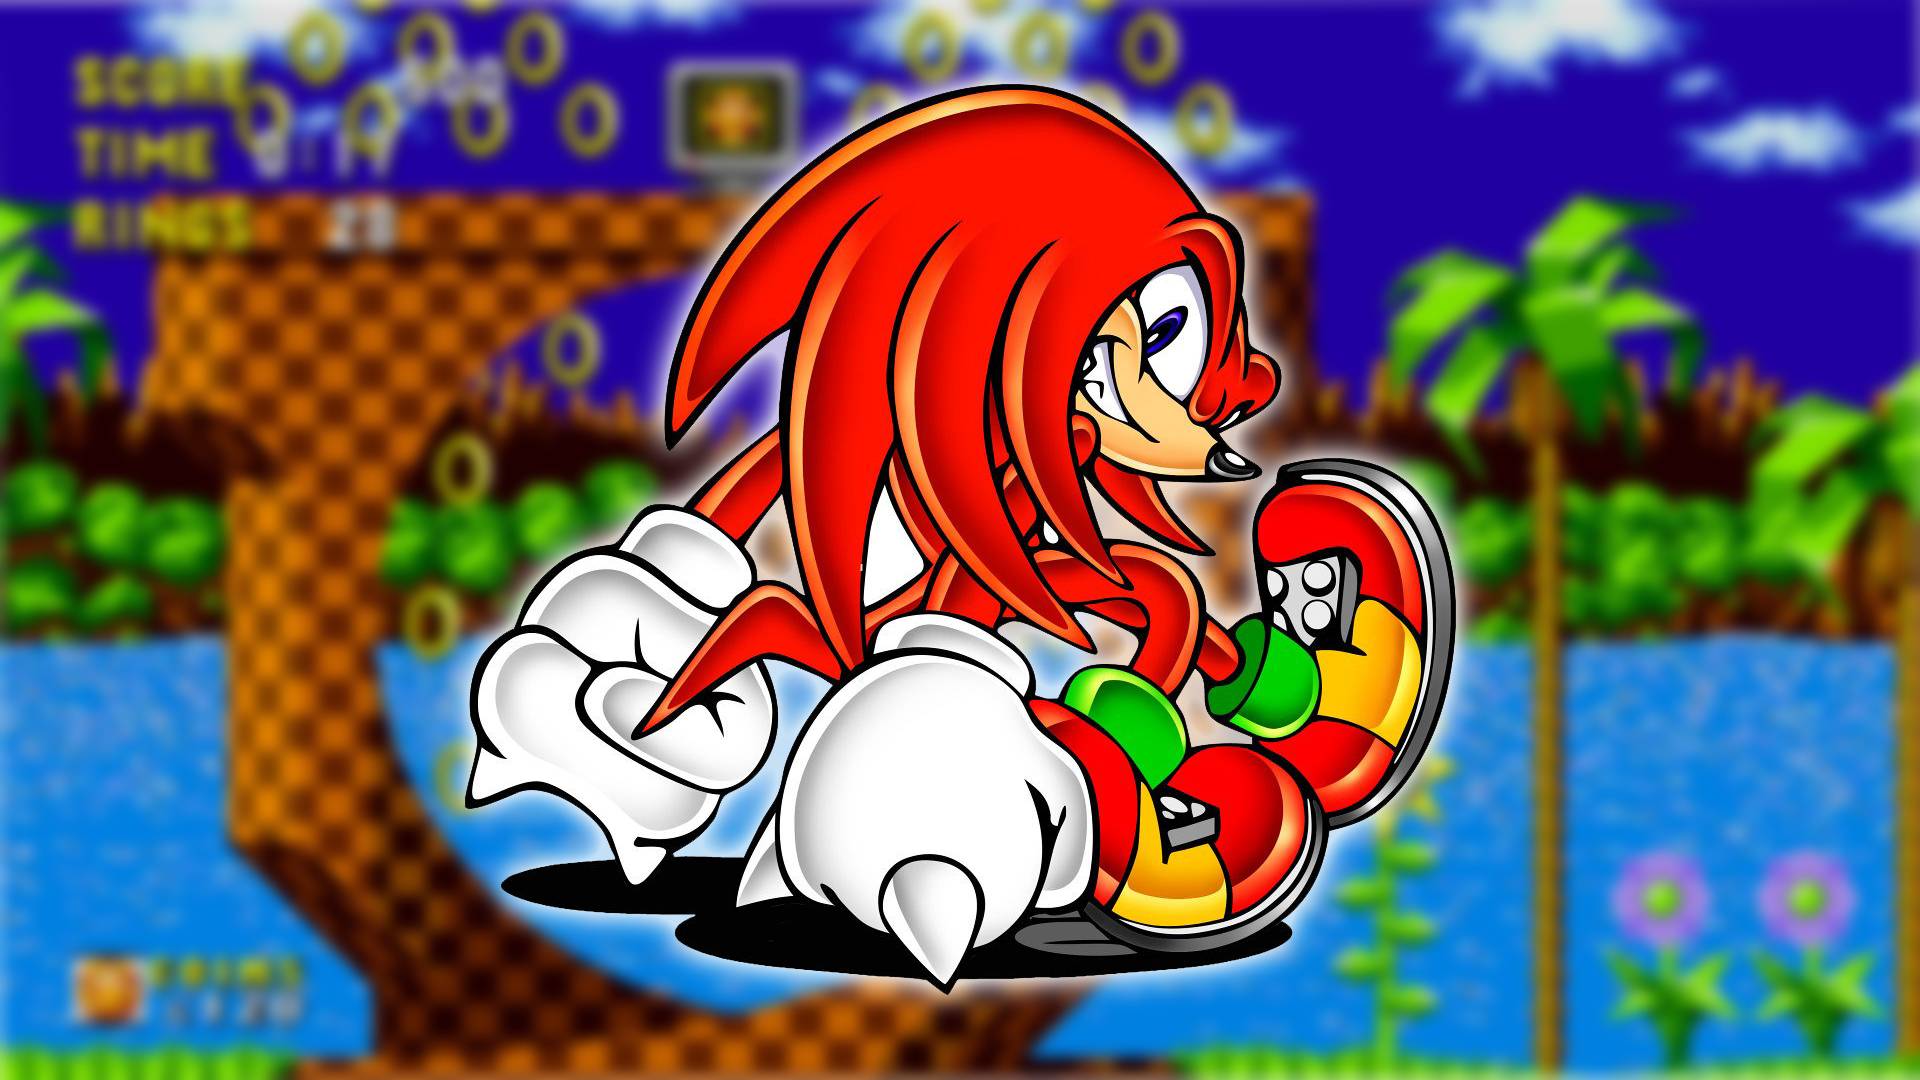 Sonic the Hedgehog: Knuckles the Echidna is visible